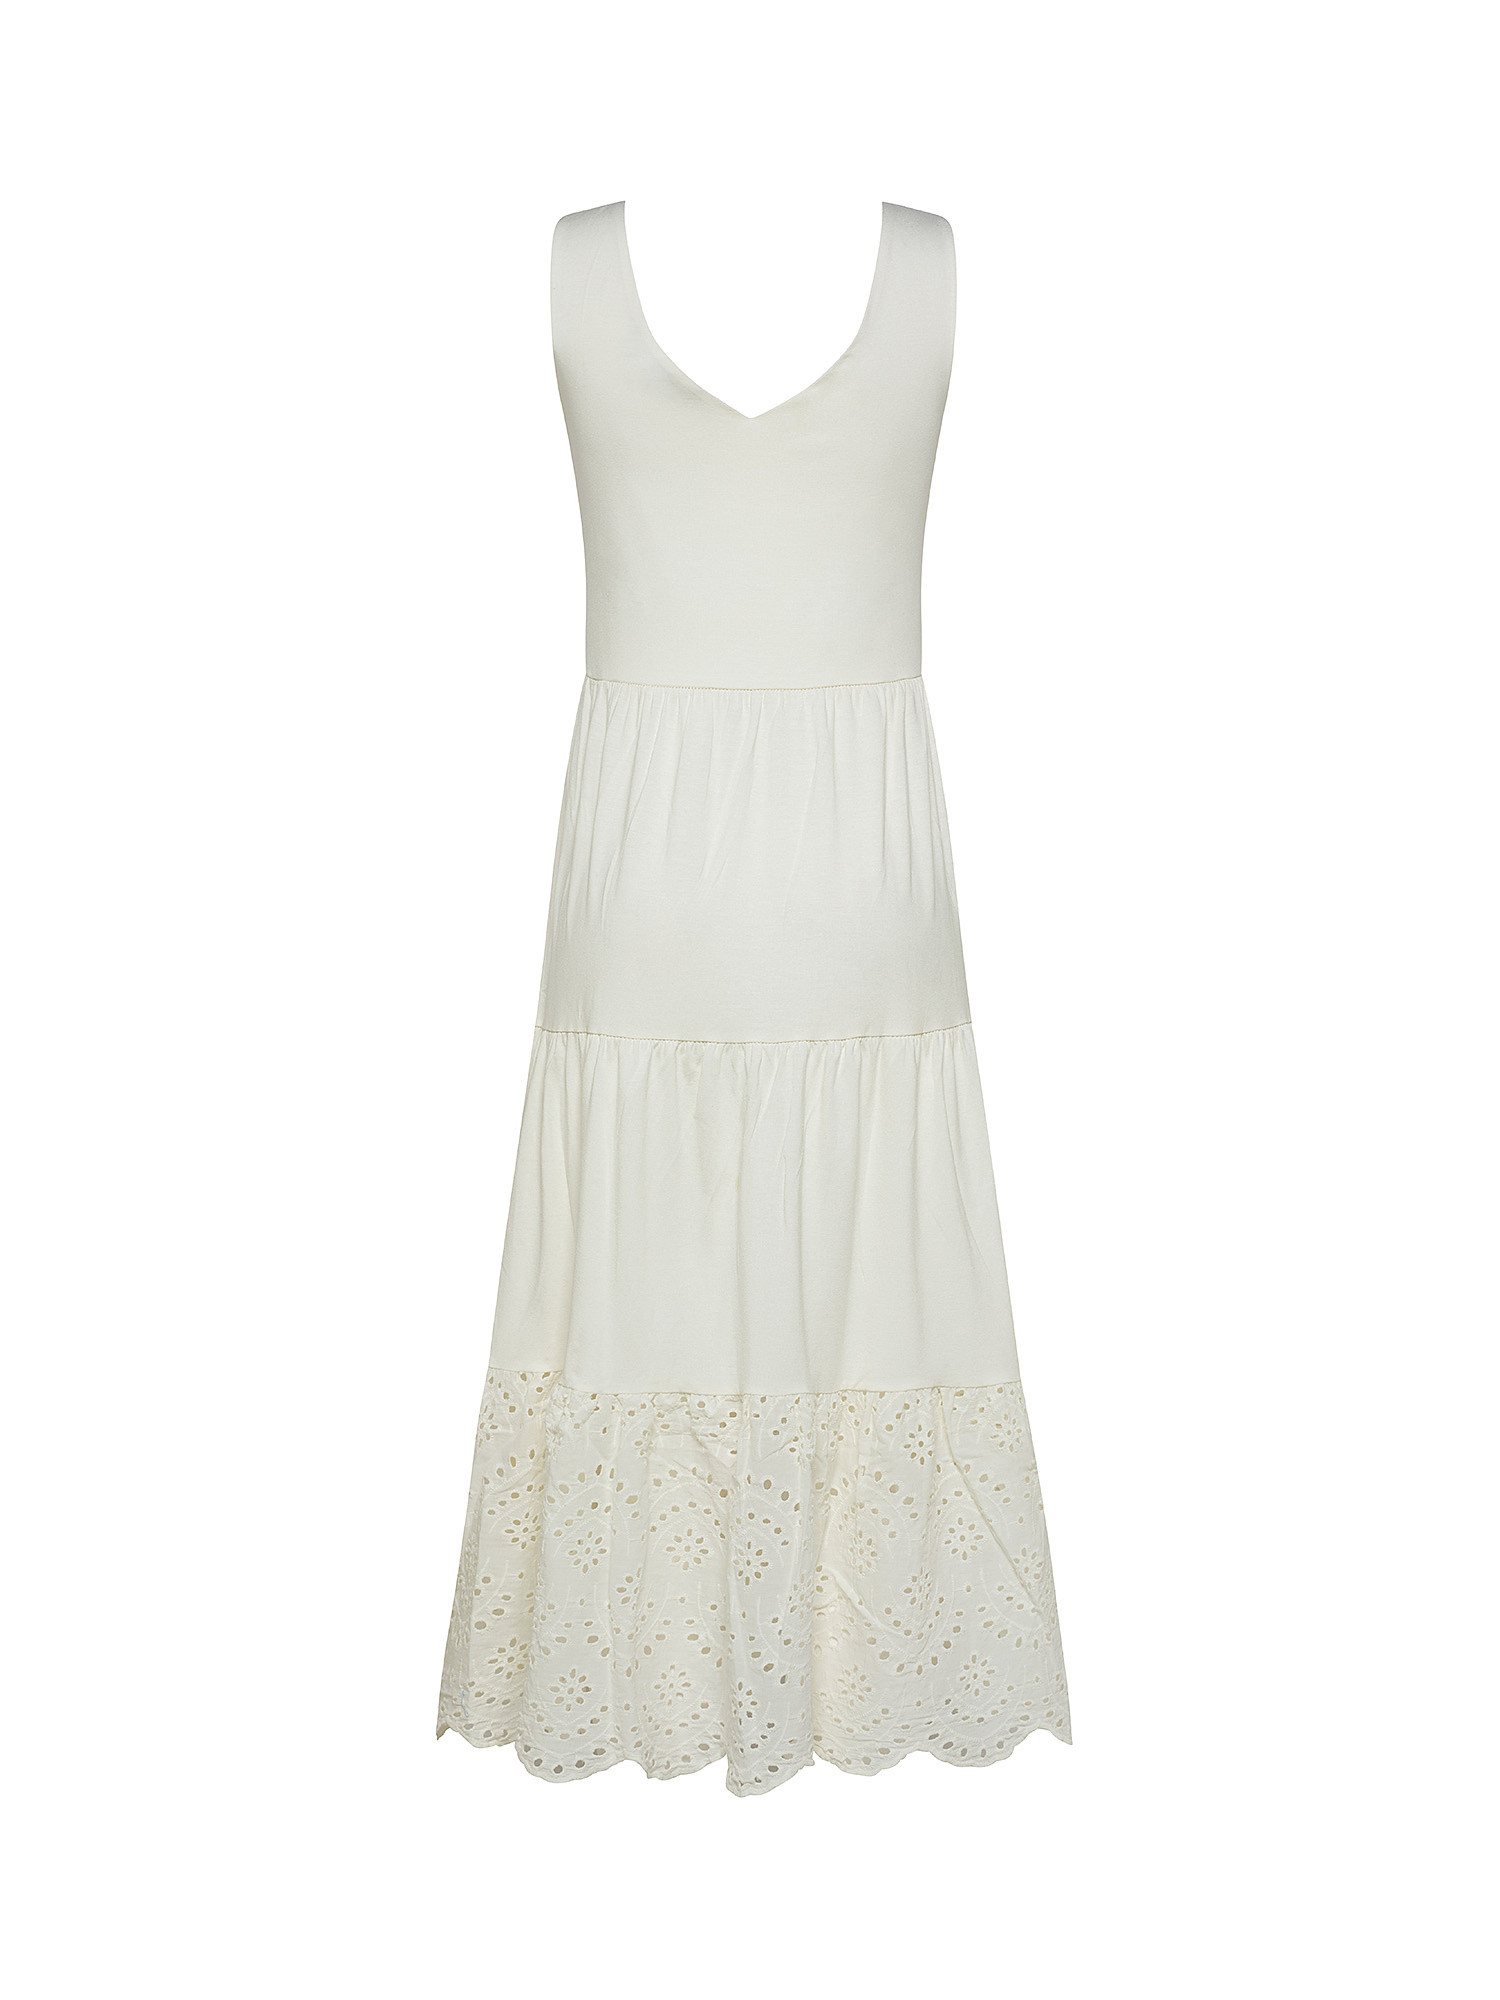 Dress with flounces, White, large image number 1